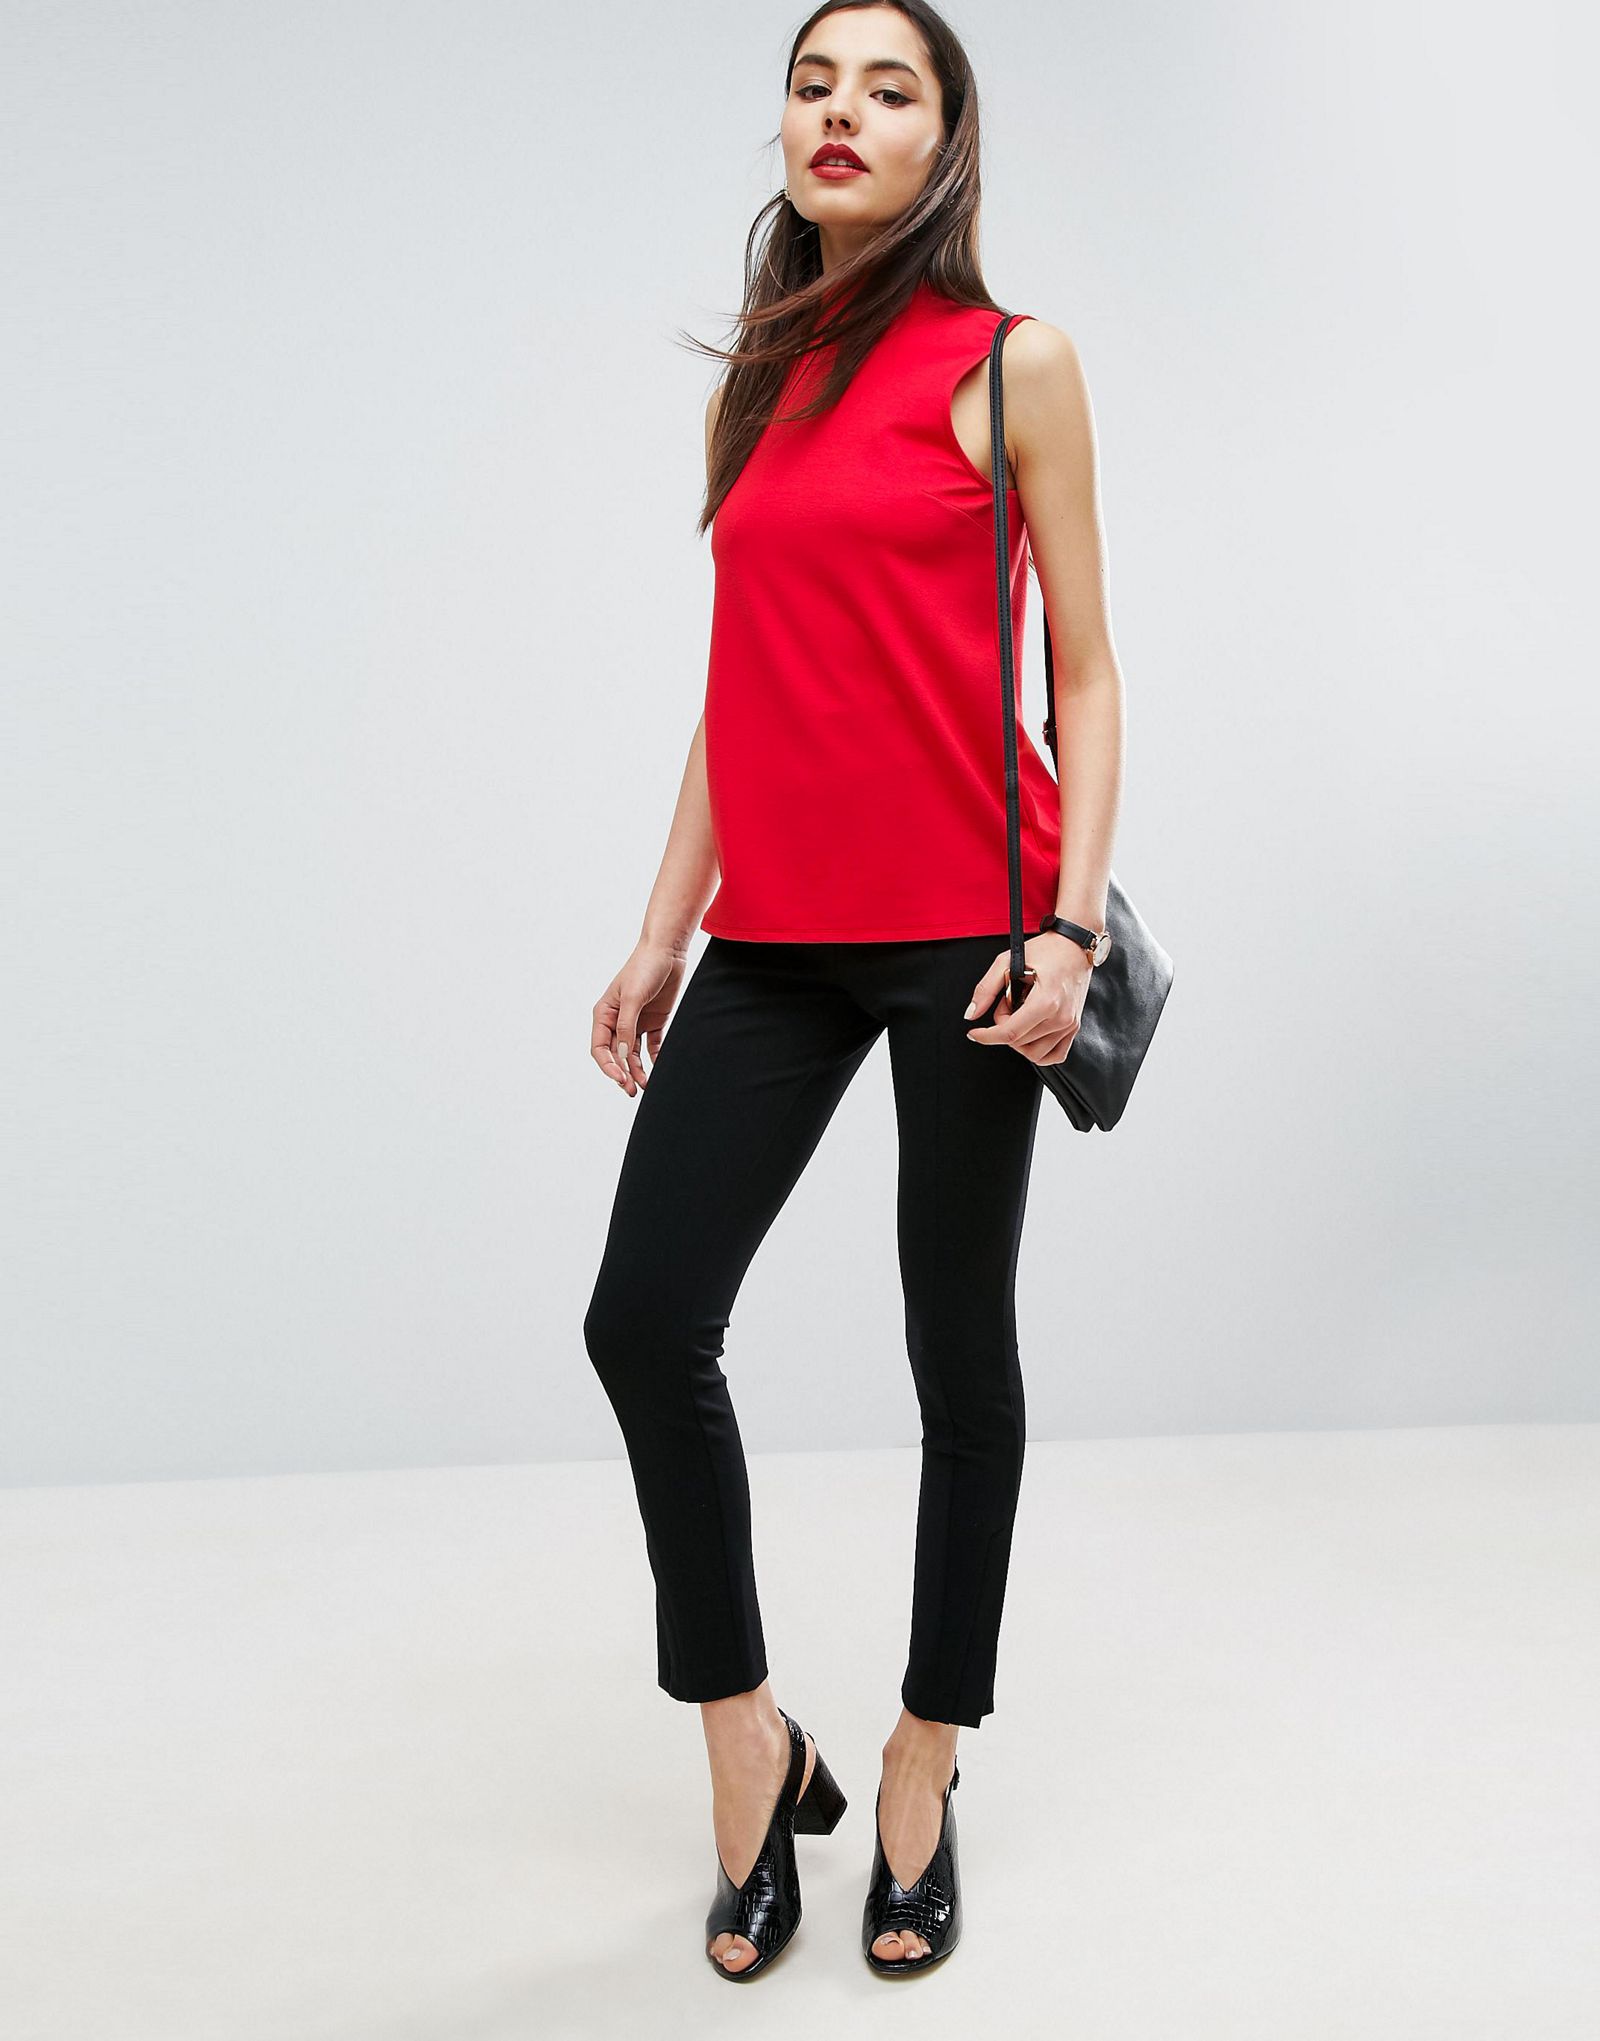 ASOS Top with High Neck in Ponte